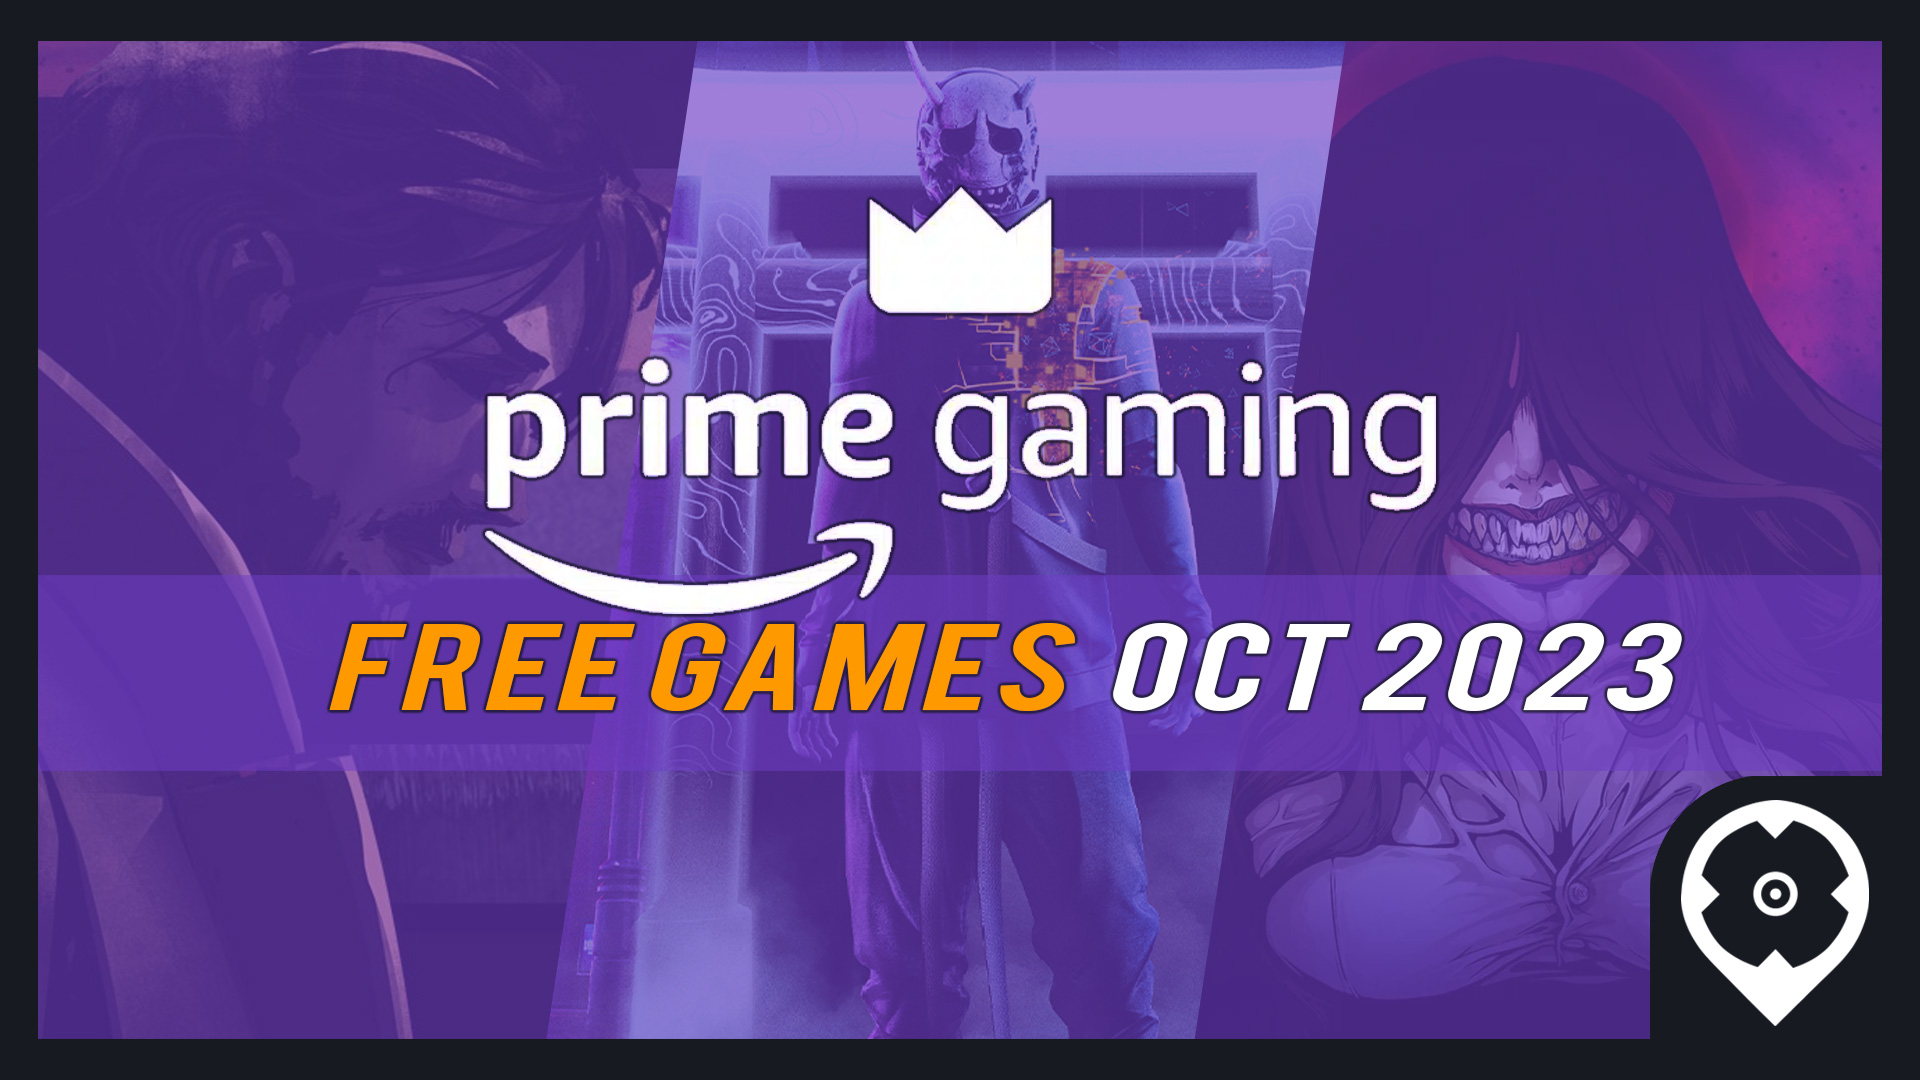 Prime Gaming members get free items for Roblox! - Pro Game Guides